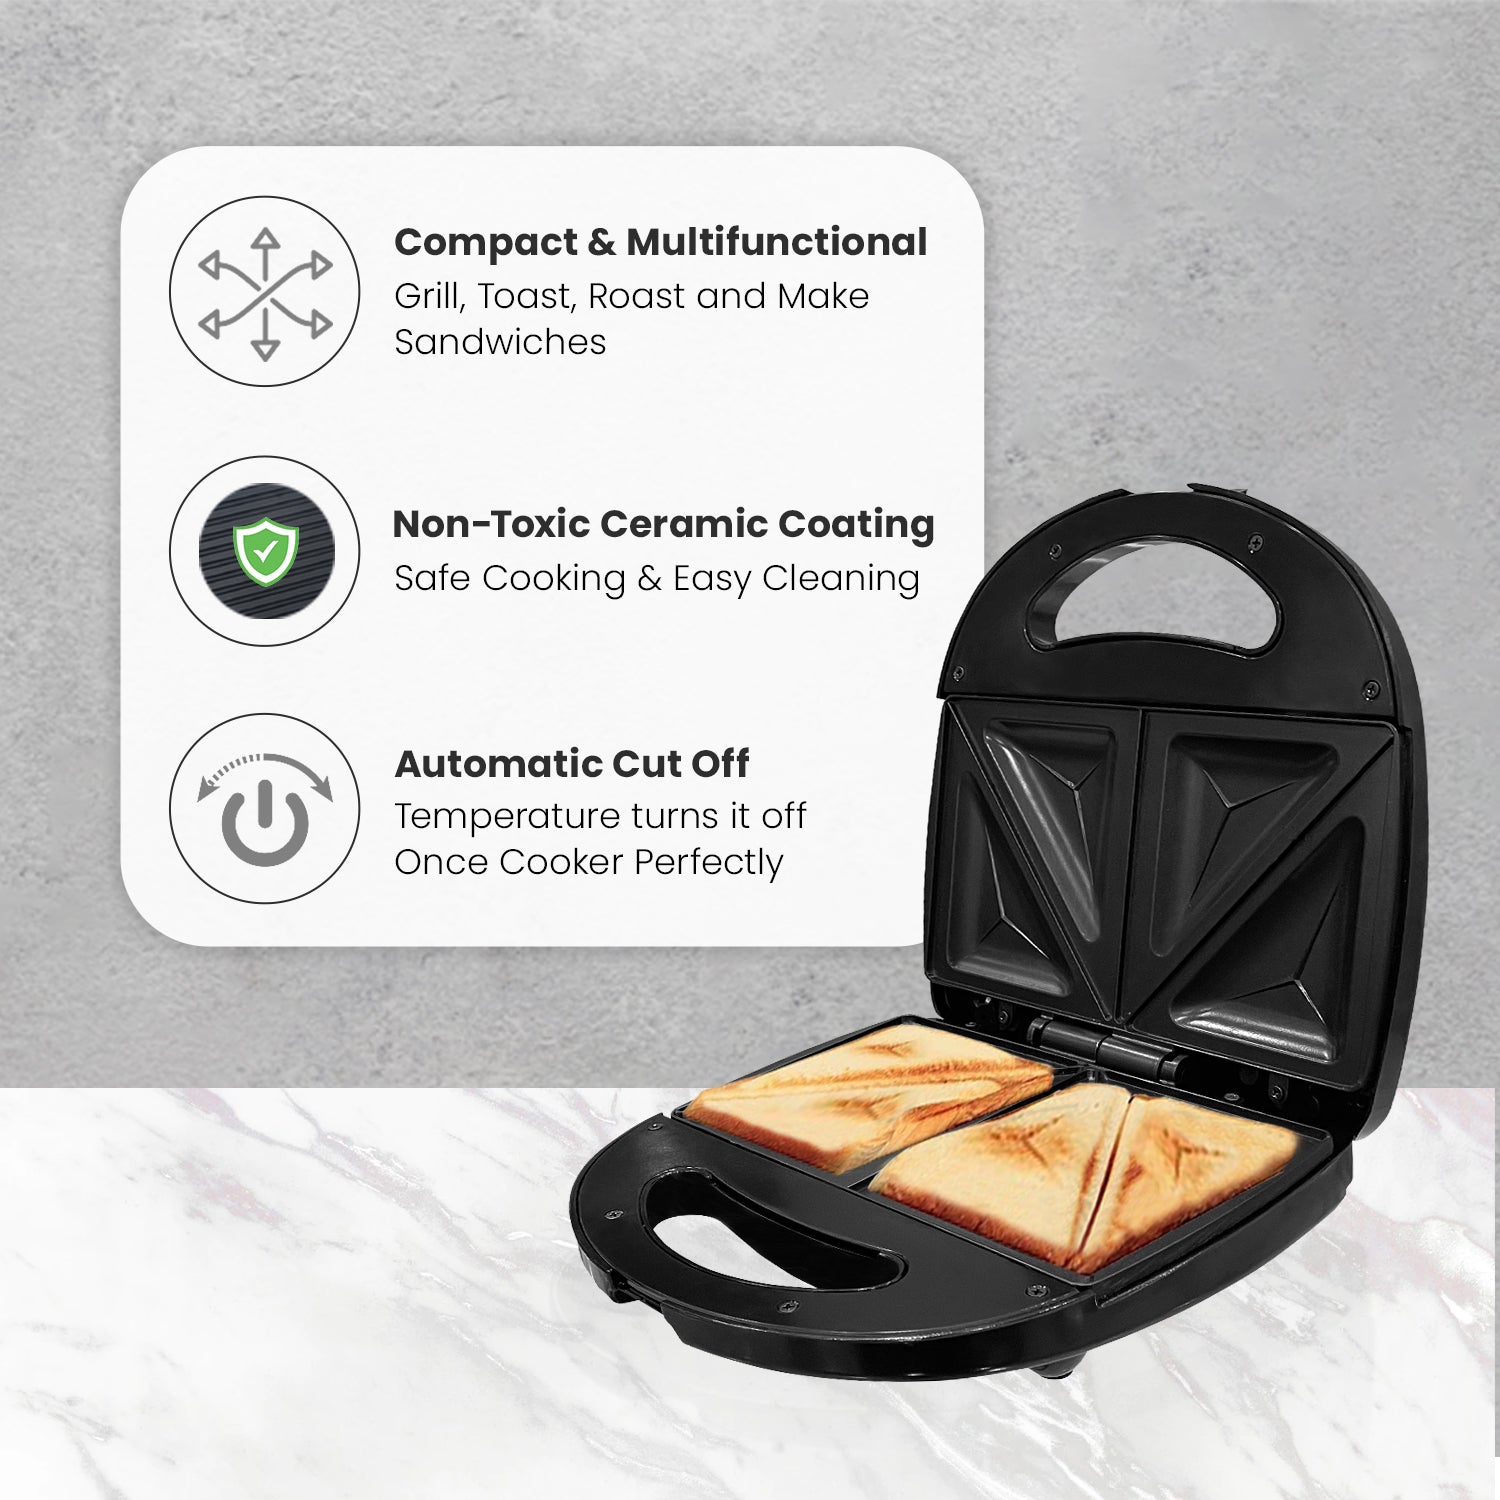 Crunch Sandwich Toaster, 750 W with 4 Slice Non-Stick Toast  (Black & Silver)